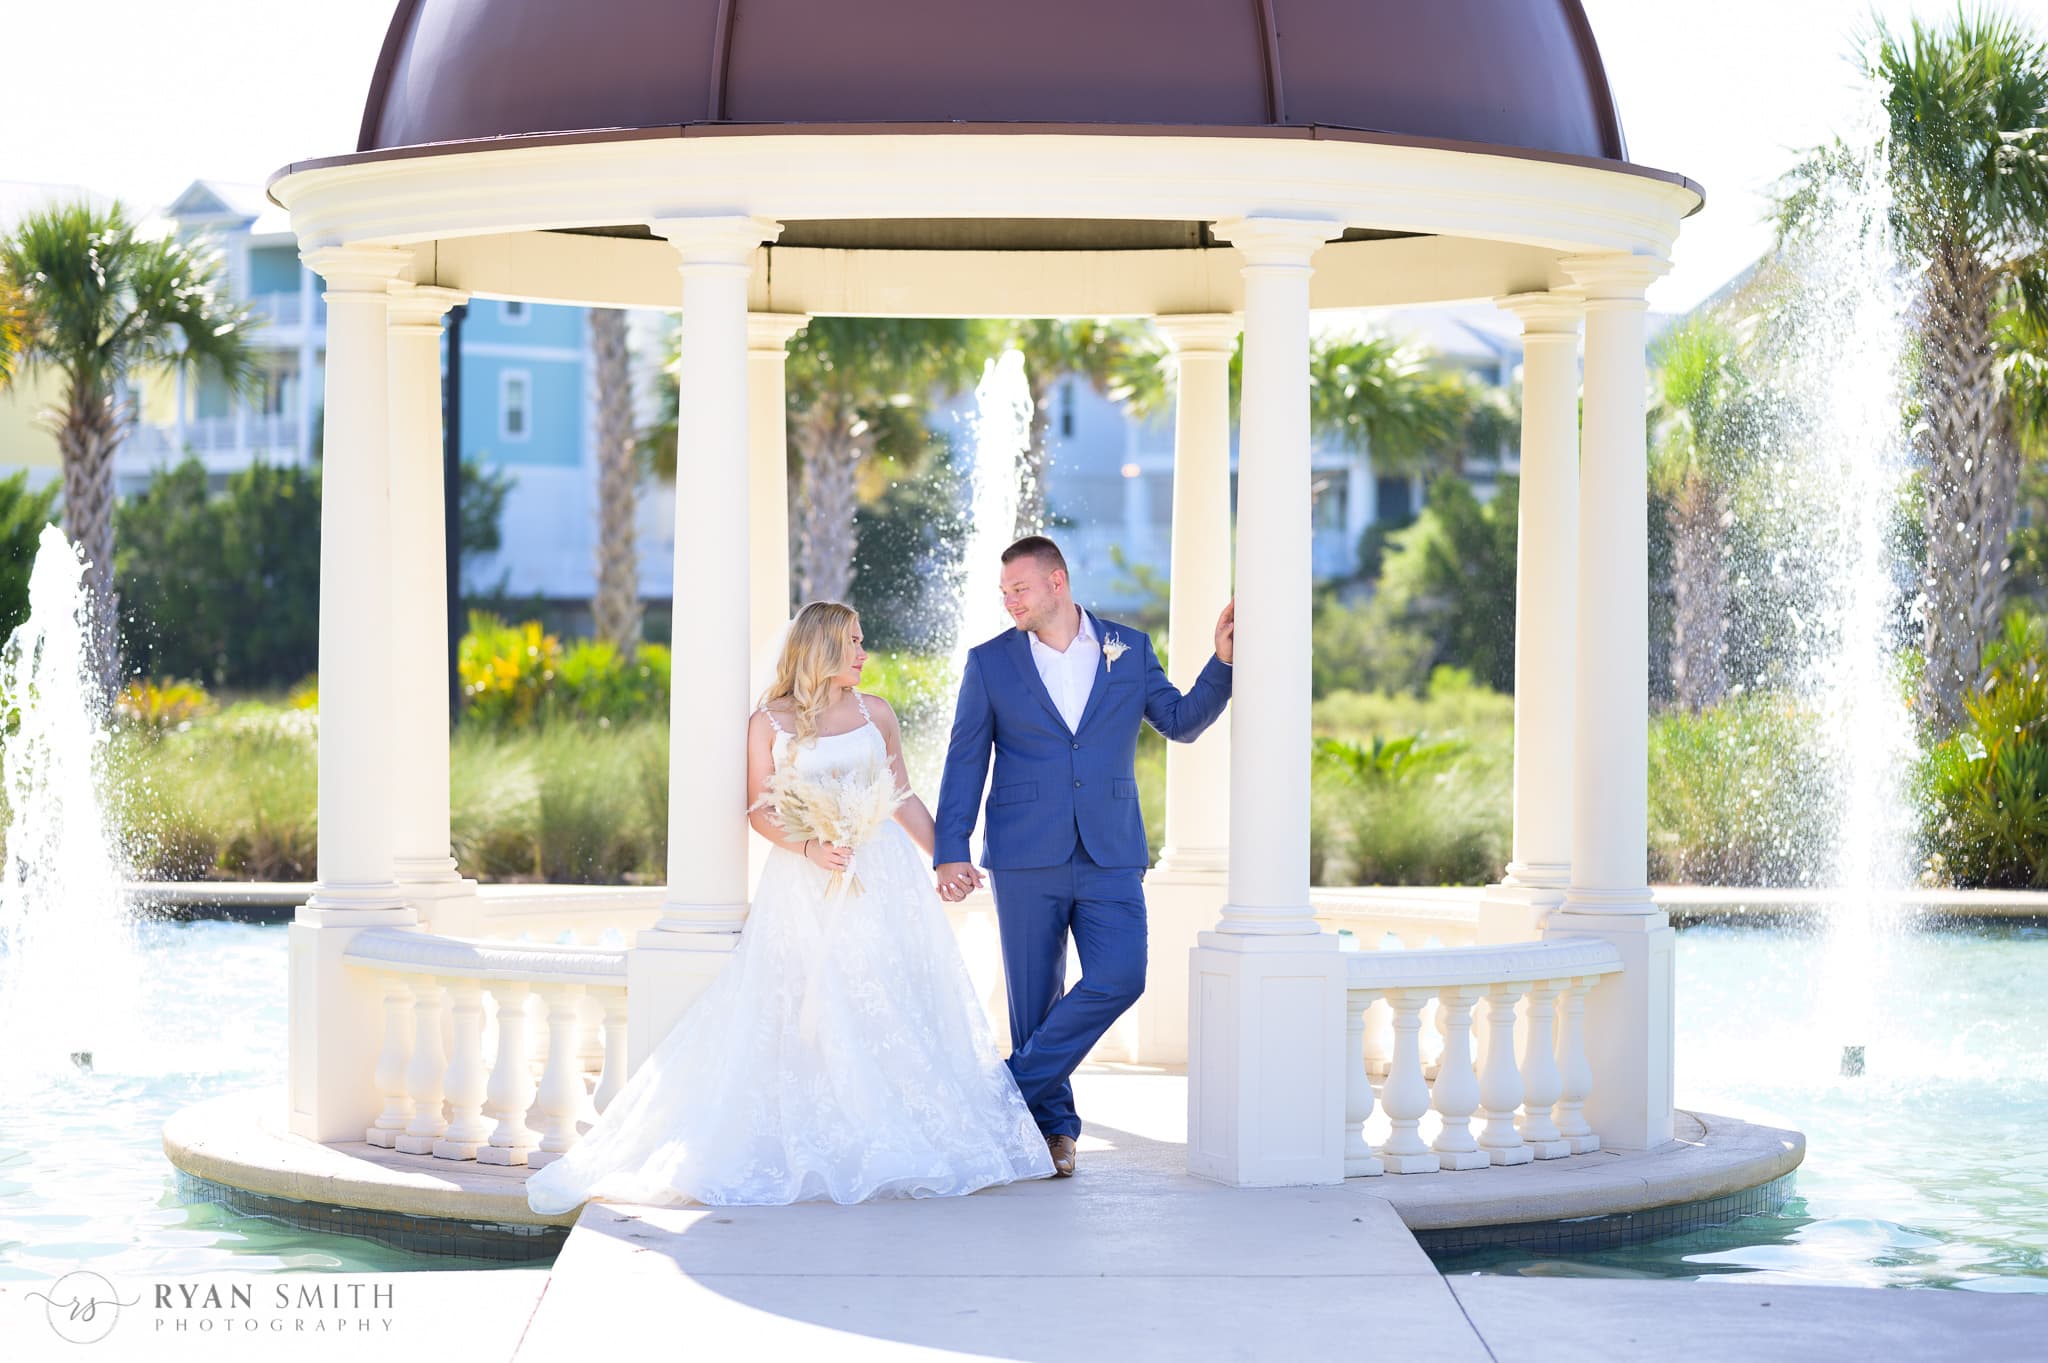 Bride and groom leaning against the columns of the gazebo  - North Beach Resort & Villas